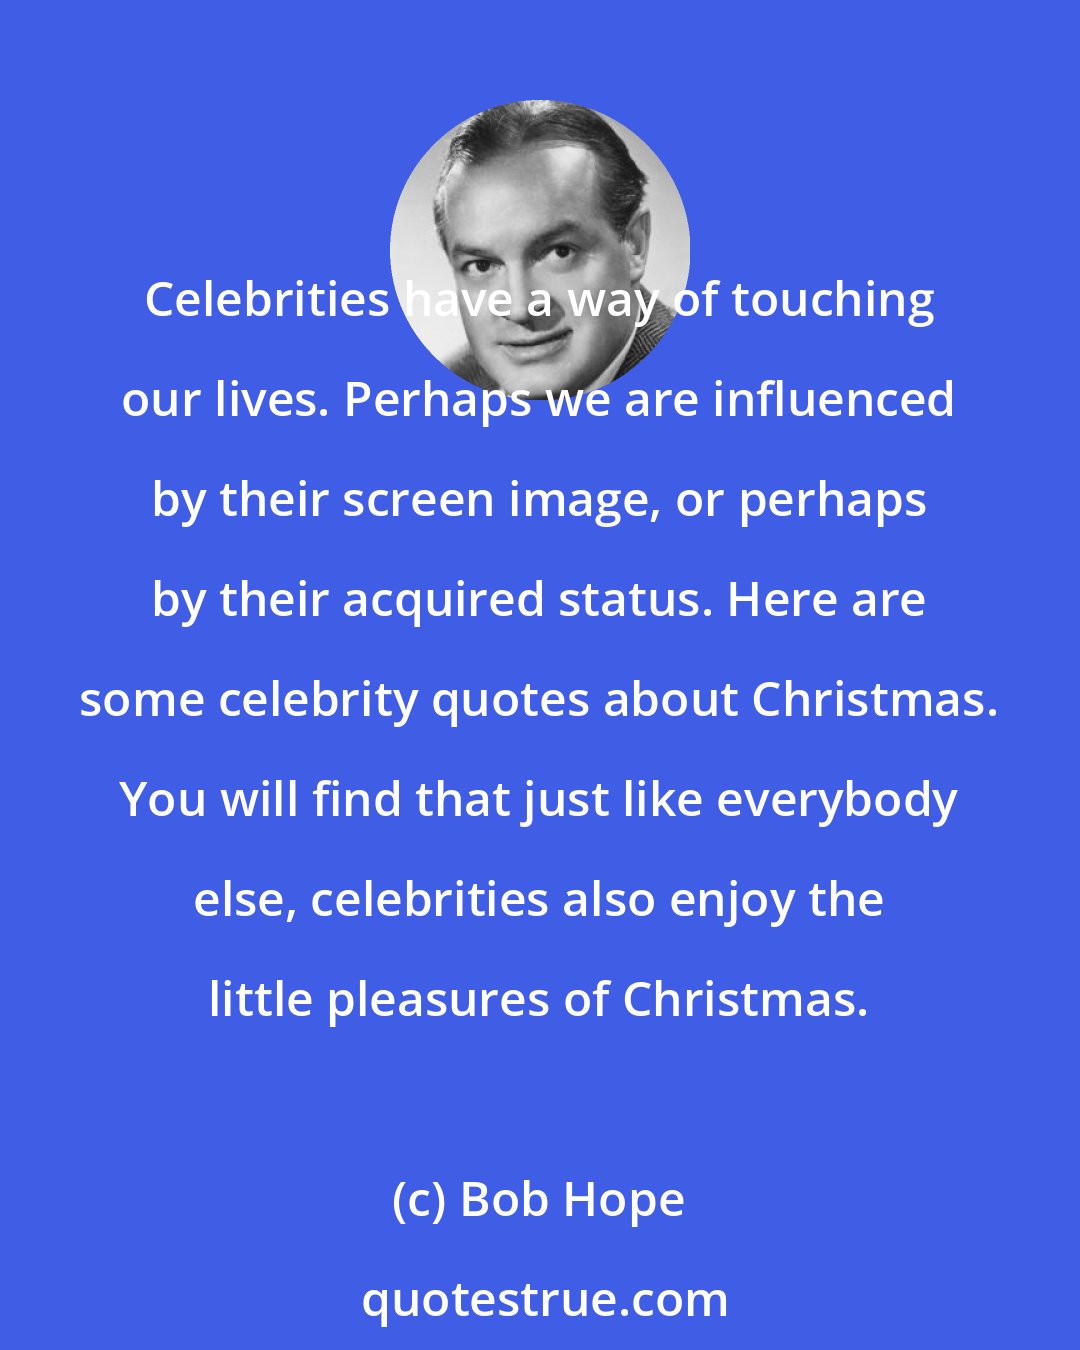 Bob Hope: Celebrities have a way of touching our lives. Perhaps we are influenced by their screen image, or perhaps by their acquired status. Here are some celebrity quotes about Christmas. You will find that just like everybody else, celebrities also enjoy the little pleasures of Christmas.